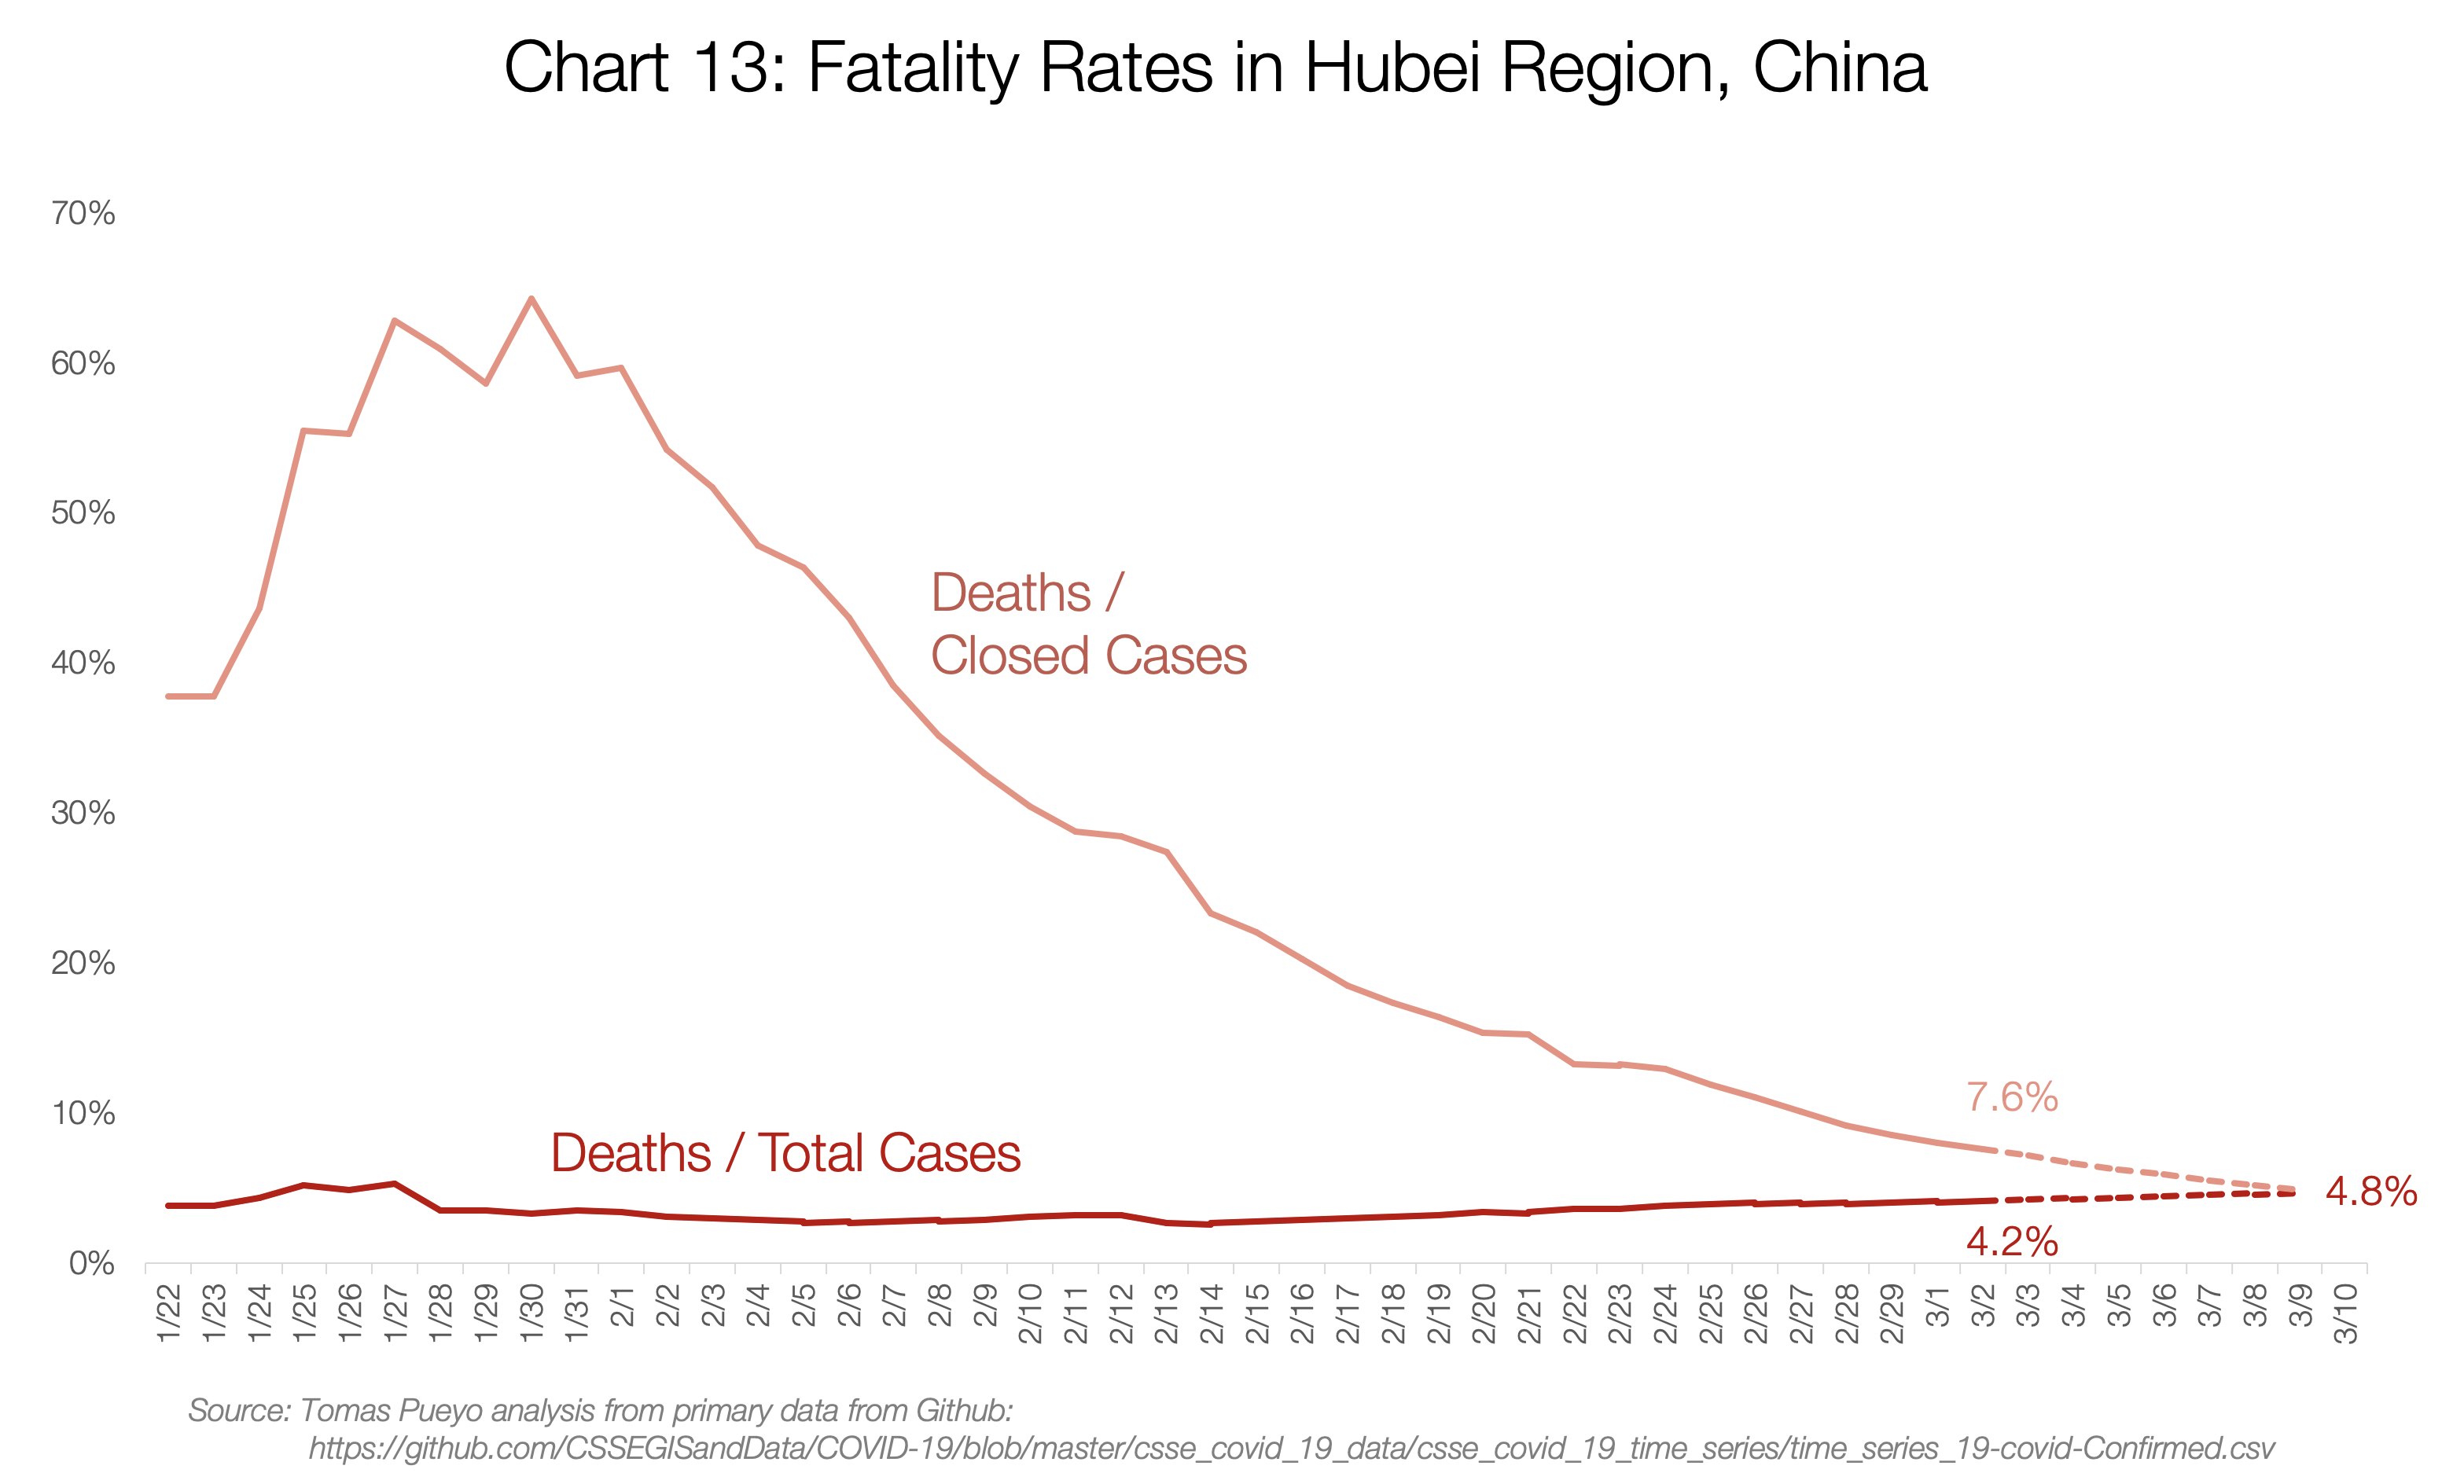 13. fatality rates in Hubei región China